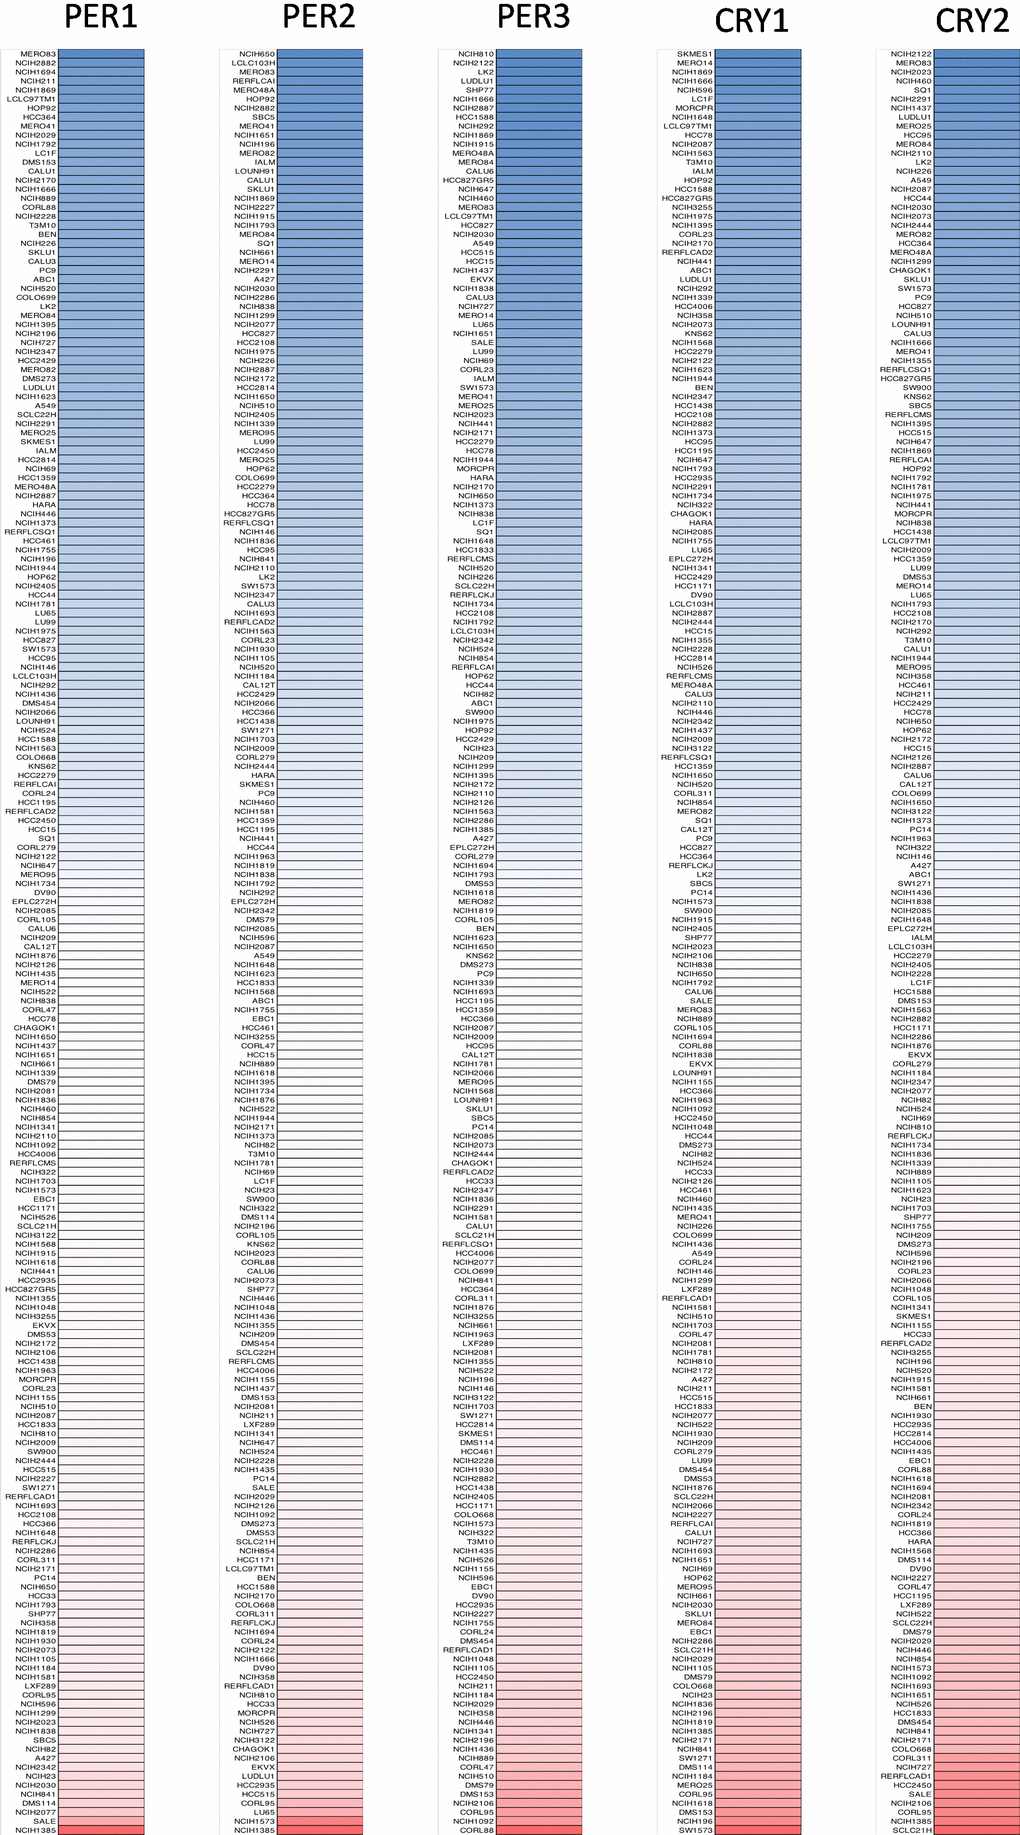 Gene expression levels of PER (period) and CRY (cryptochrome) family members when screening 198 lung cancer cell lines (CCLE database). PER1, PER2, PER3, CRY1, and CRY2 expression levels were differentiated into five columns. The blue blocks indicated under-expression, whereas the red blocks represented overexpression.